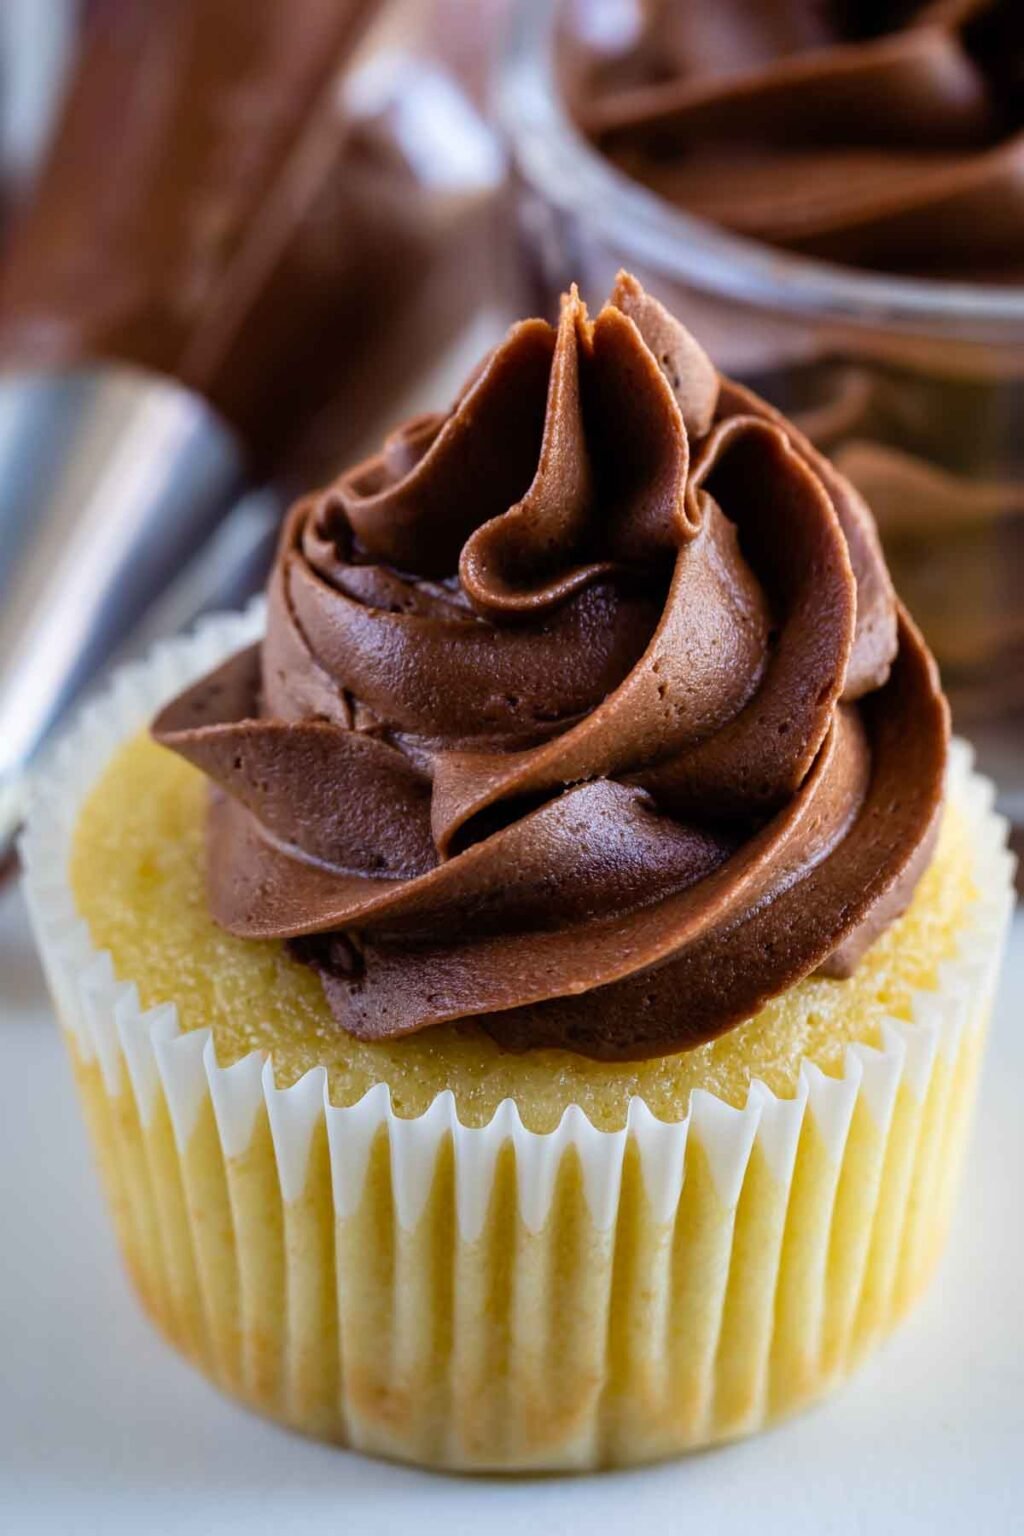 Whipped Chocolate Buttercream Frosting Recipe - Crazy for Crust